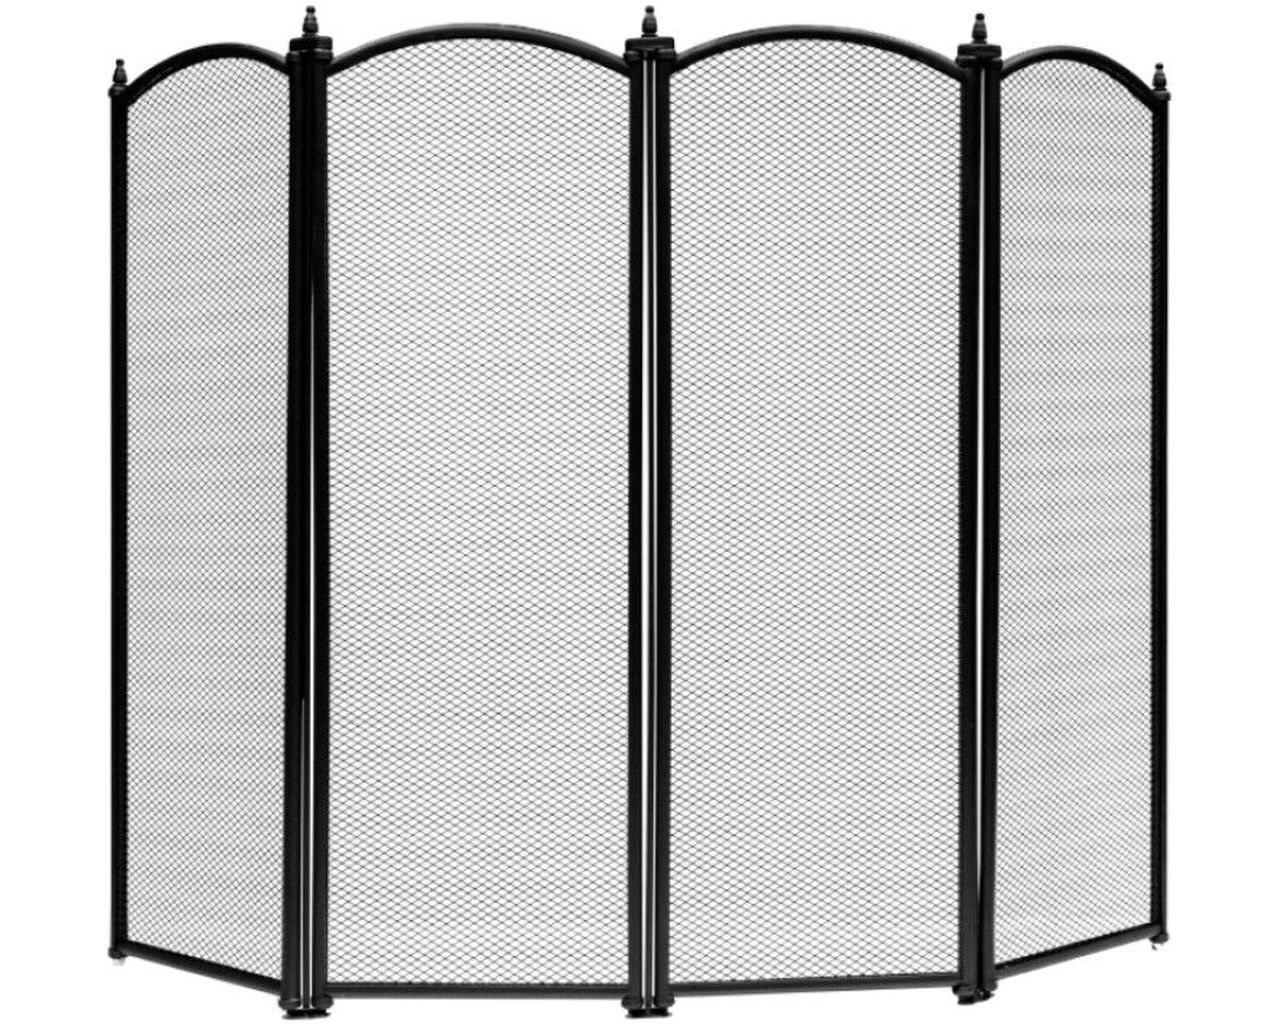 Maxiheat 4 Panel Firescreen, , hi-res image number null